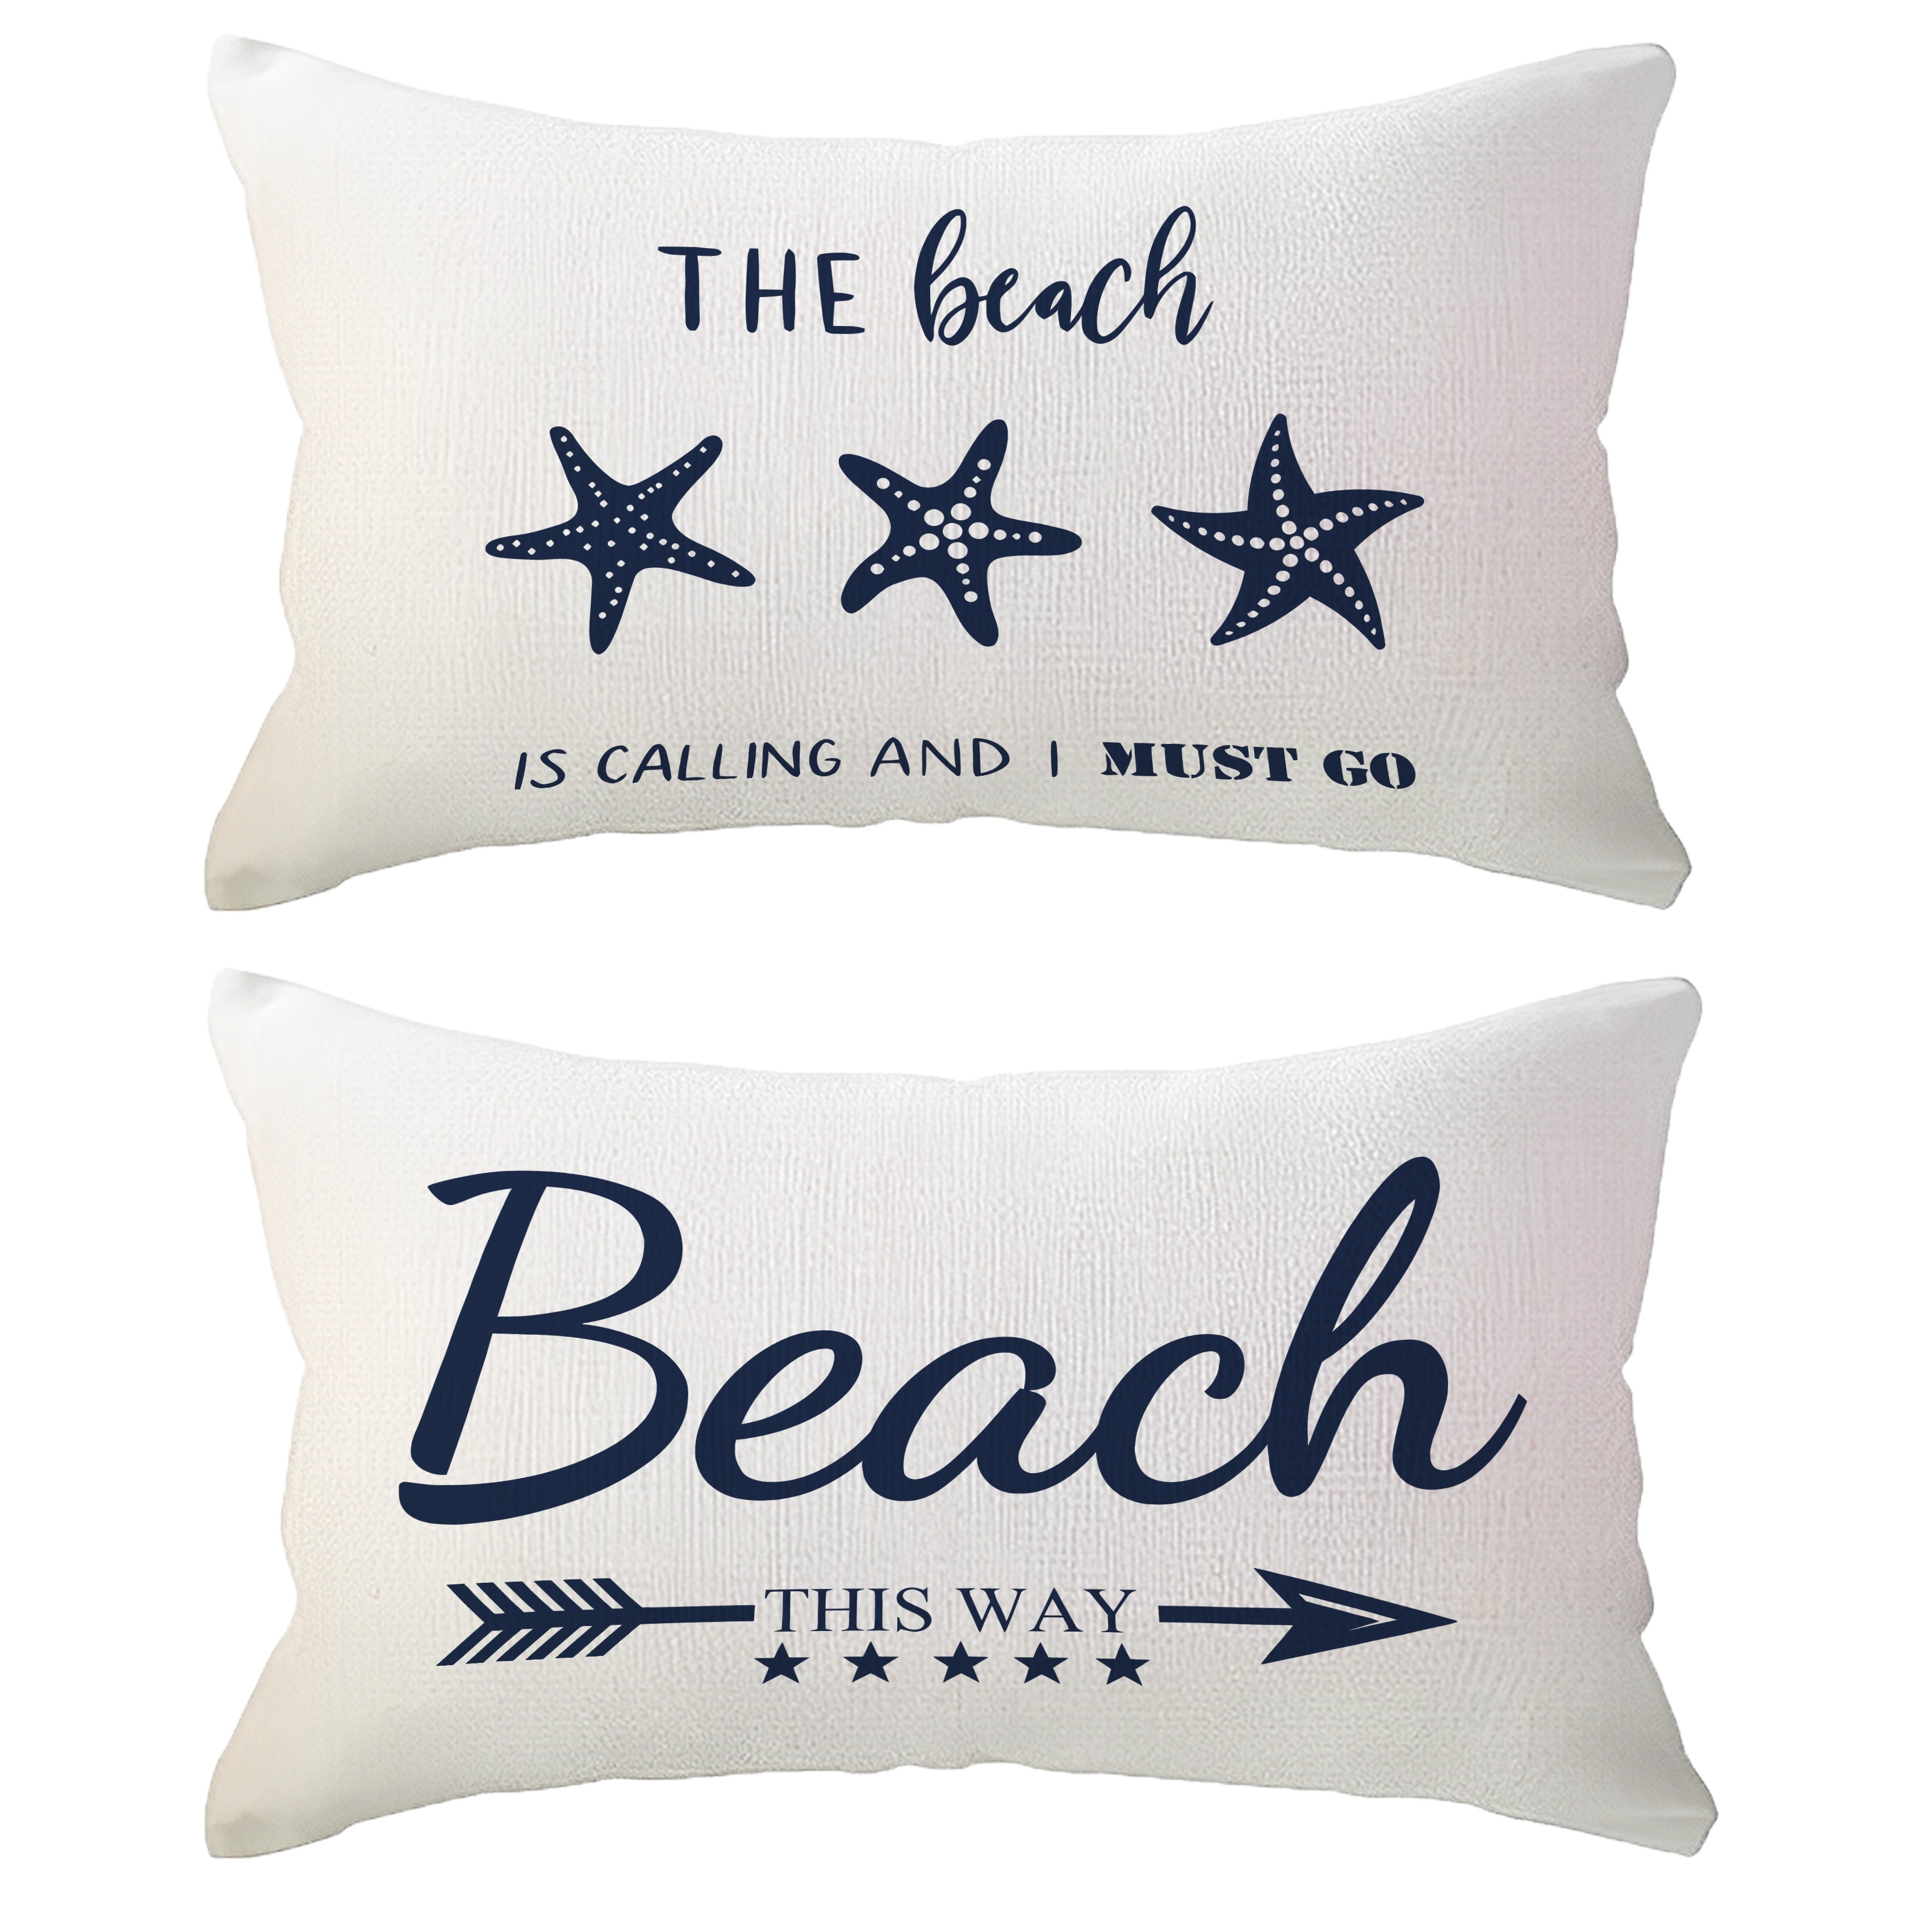 

1-pack Coastal Themed Linen Pillow Covers, 11.8x19.68 Inches, "the Beach Is Calling" & "beach This Way" Design, Nautical Starfish Accent, Cushion Cases For Beach House Decor, Without Inserts